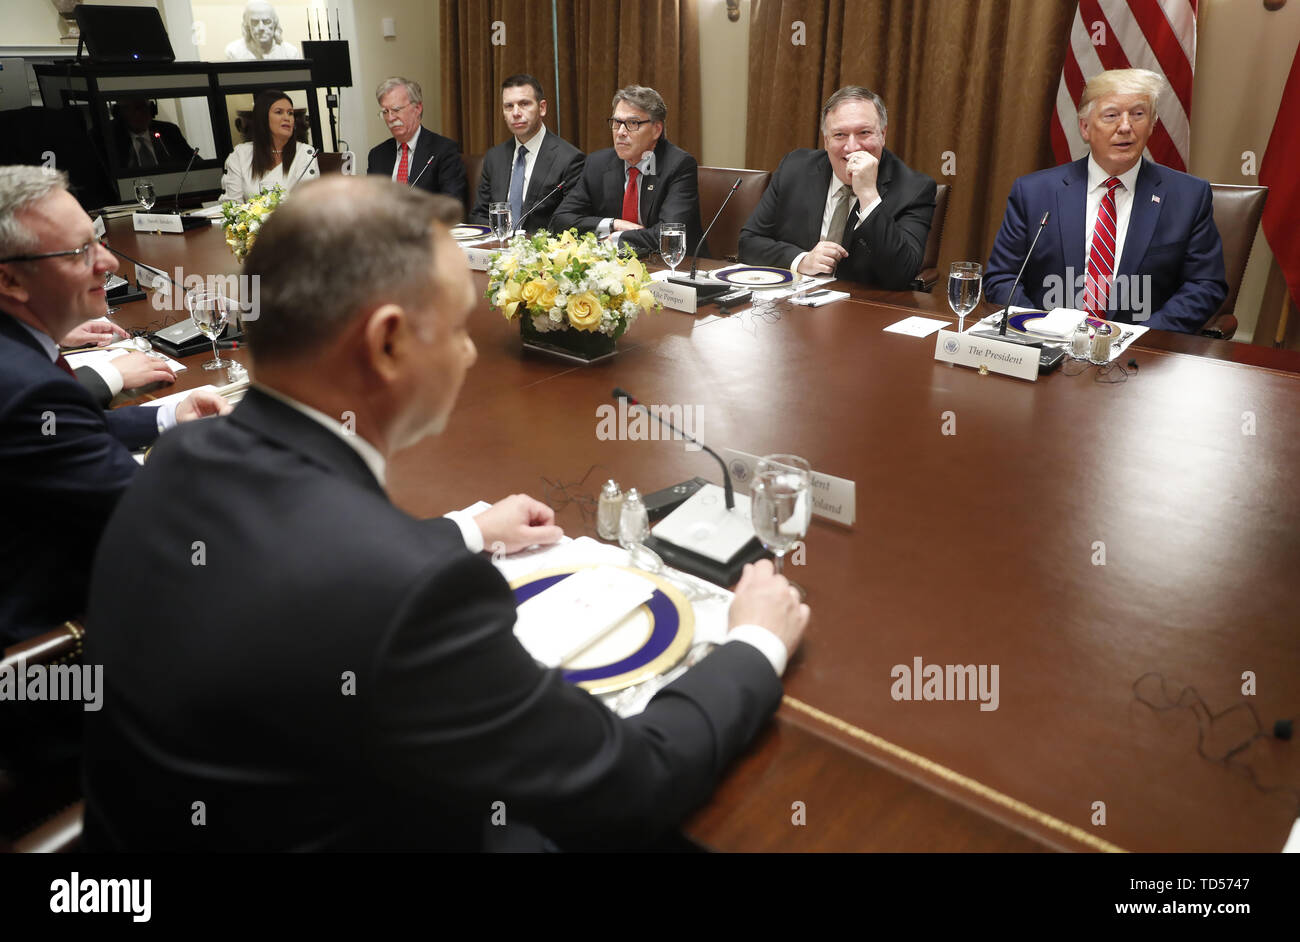 Polish President Andrzej Duda (B) and (far side L-R) White House Press Secretary Sarah Sanders, US National Security Advisor John Bolton, Acting US Secretary of Homeland Security Kevin McAleenan, US Secretary of Energy Rick Perry, US Secretary of State Mike Pompeo and US President Donald J. Trump during a luncheon in the cabinet room of the White House in Washington, DC, USA, 12 June 2019. Later in the day President Trump and President Duda will participate in a signing ceremony to increase military to military cooperation including the purchase of F-35 fighter jets and an increased US troop Stock Photo